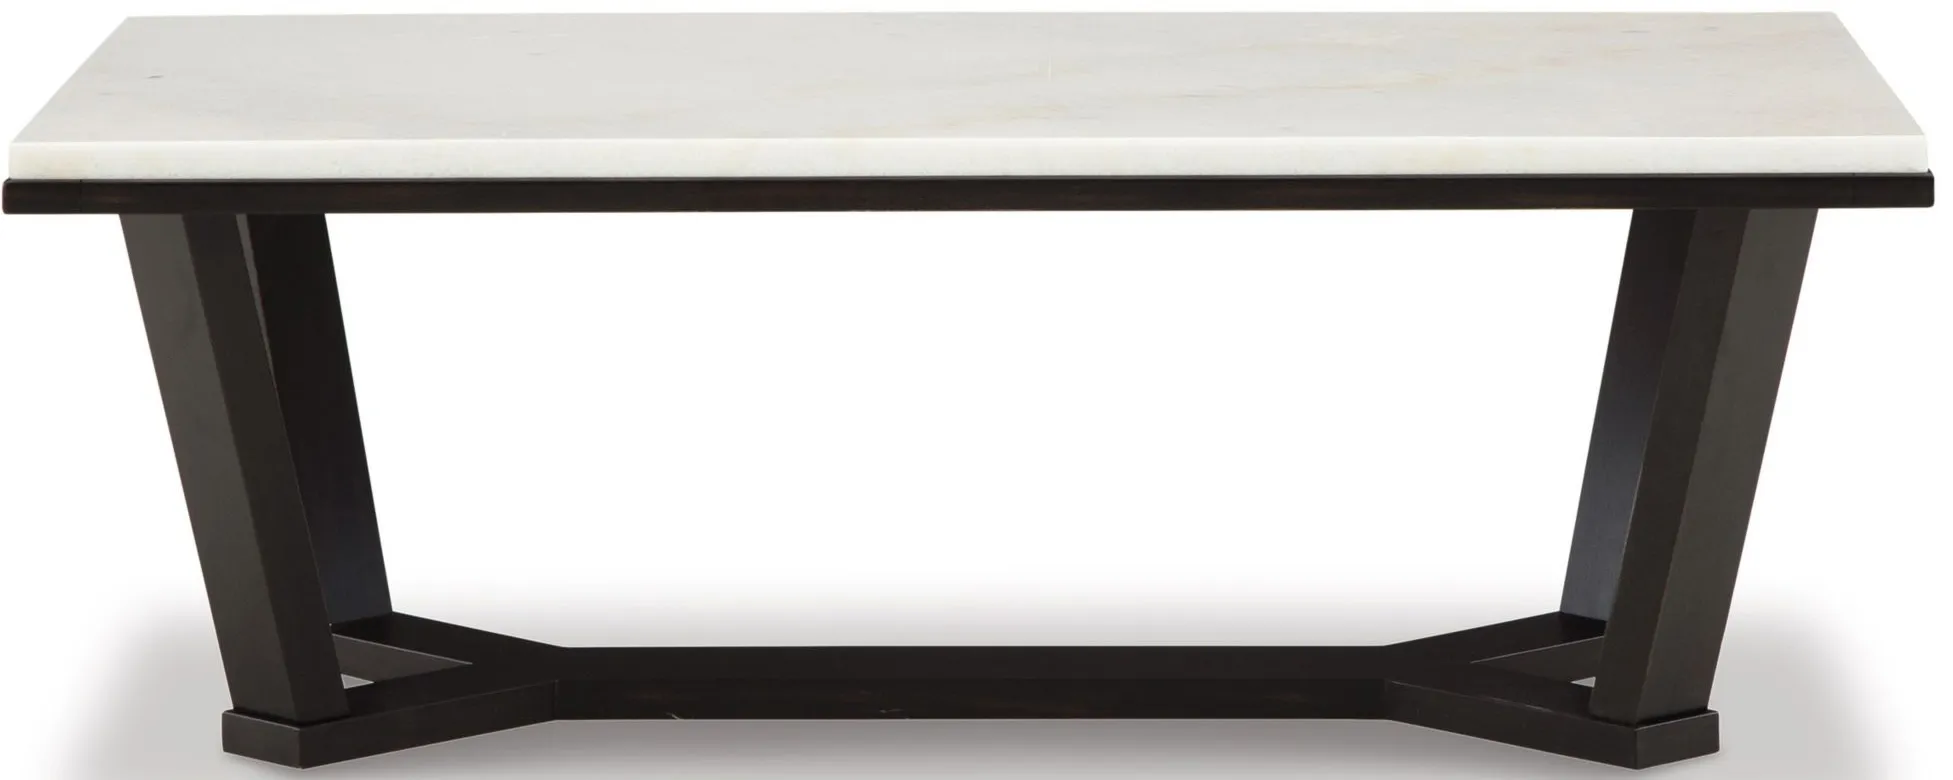 Fostead Coffee Table in White/Espresso by Ashley Express